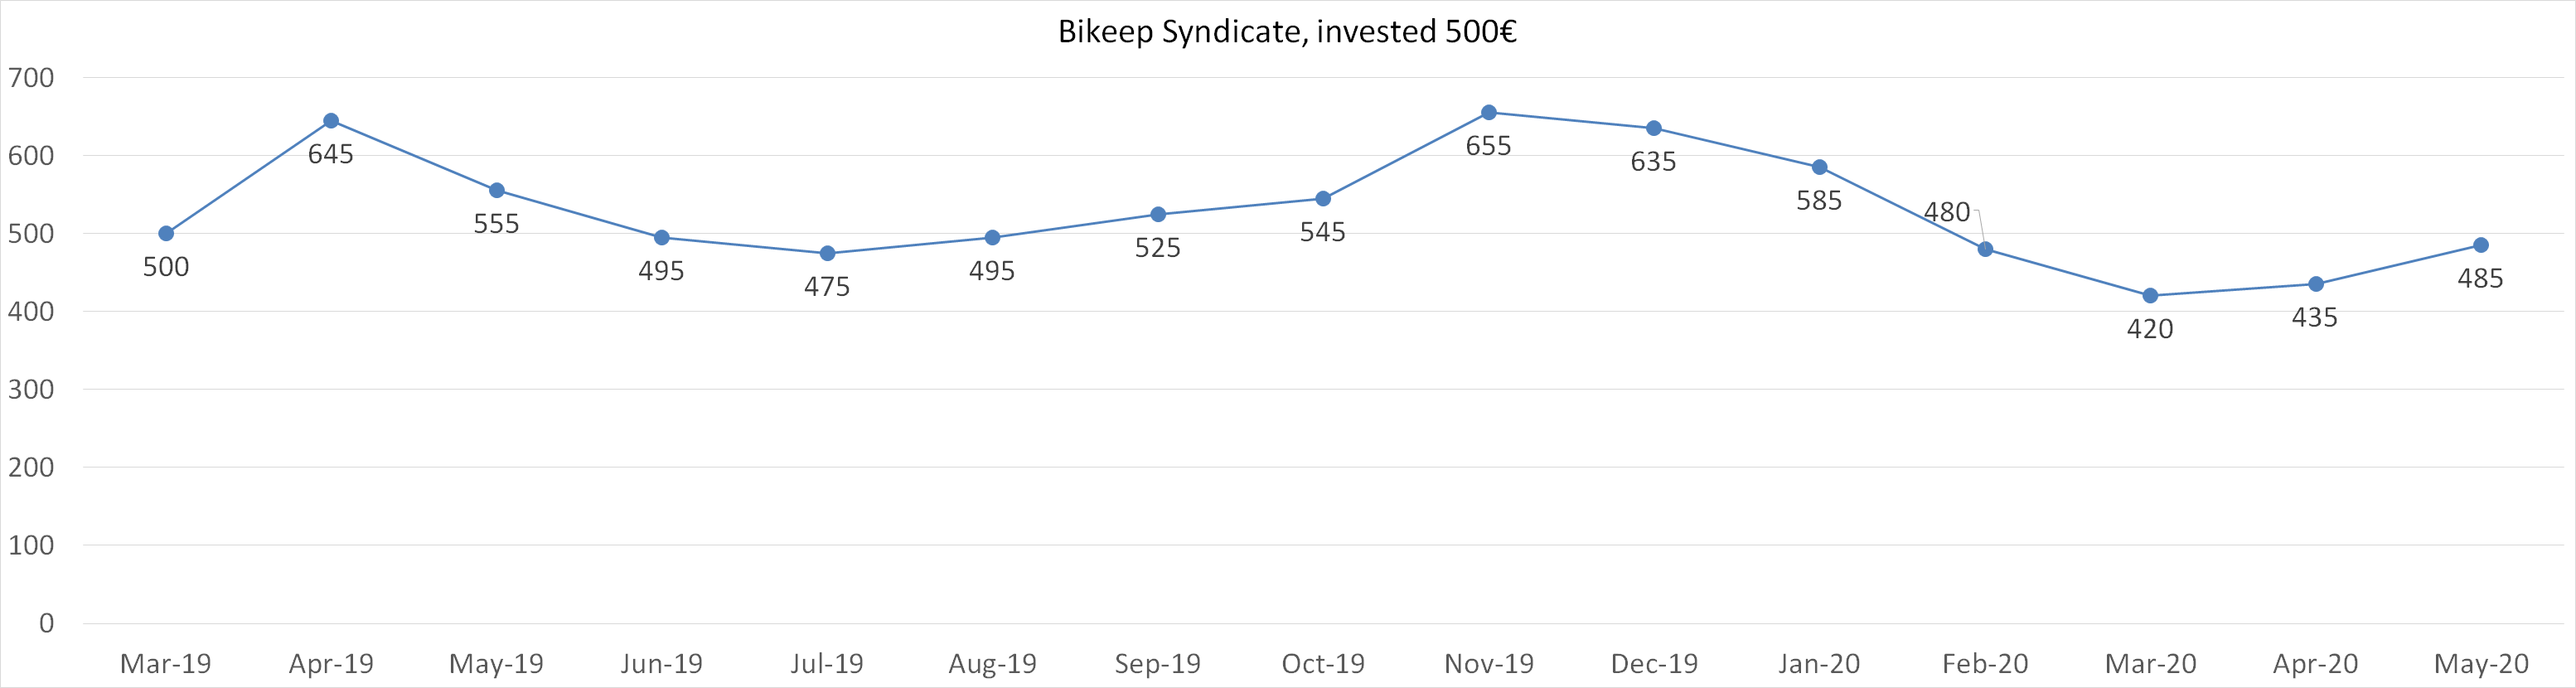 Bikeep syndicate, invested 500 euros, may 2020